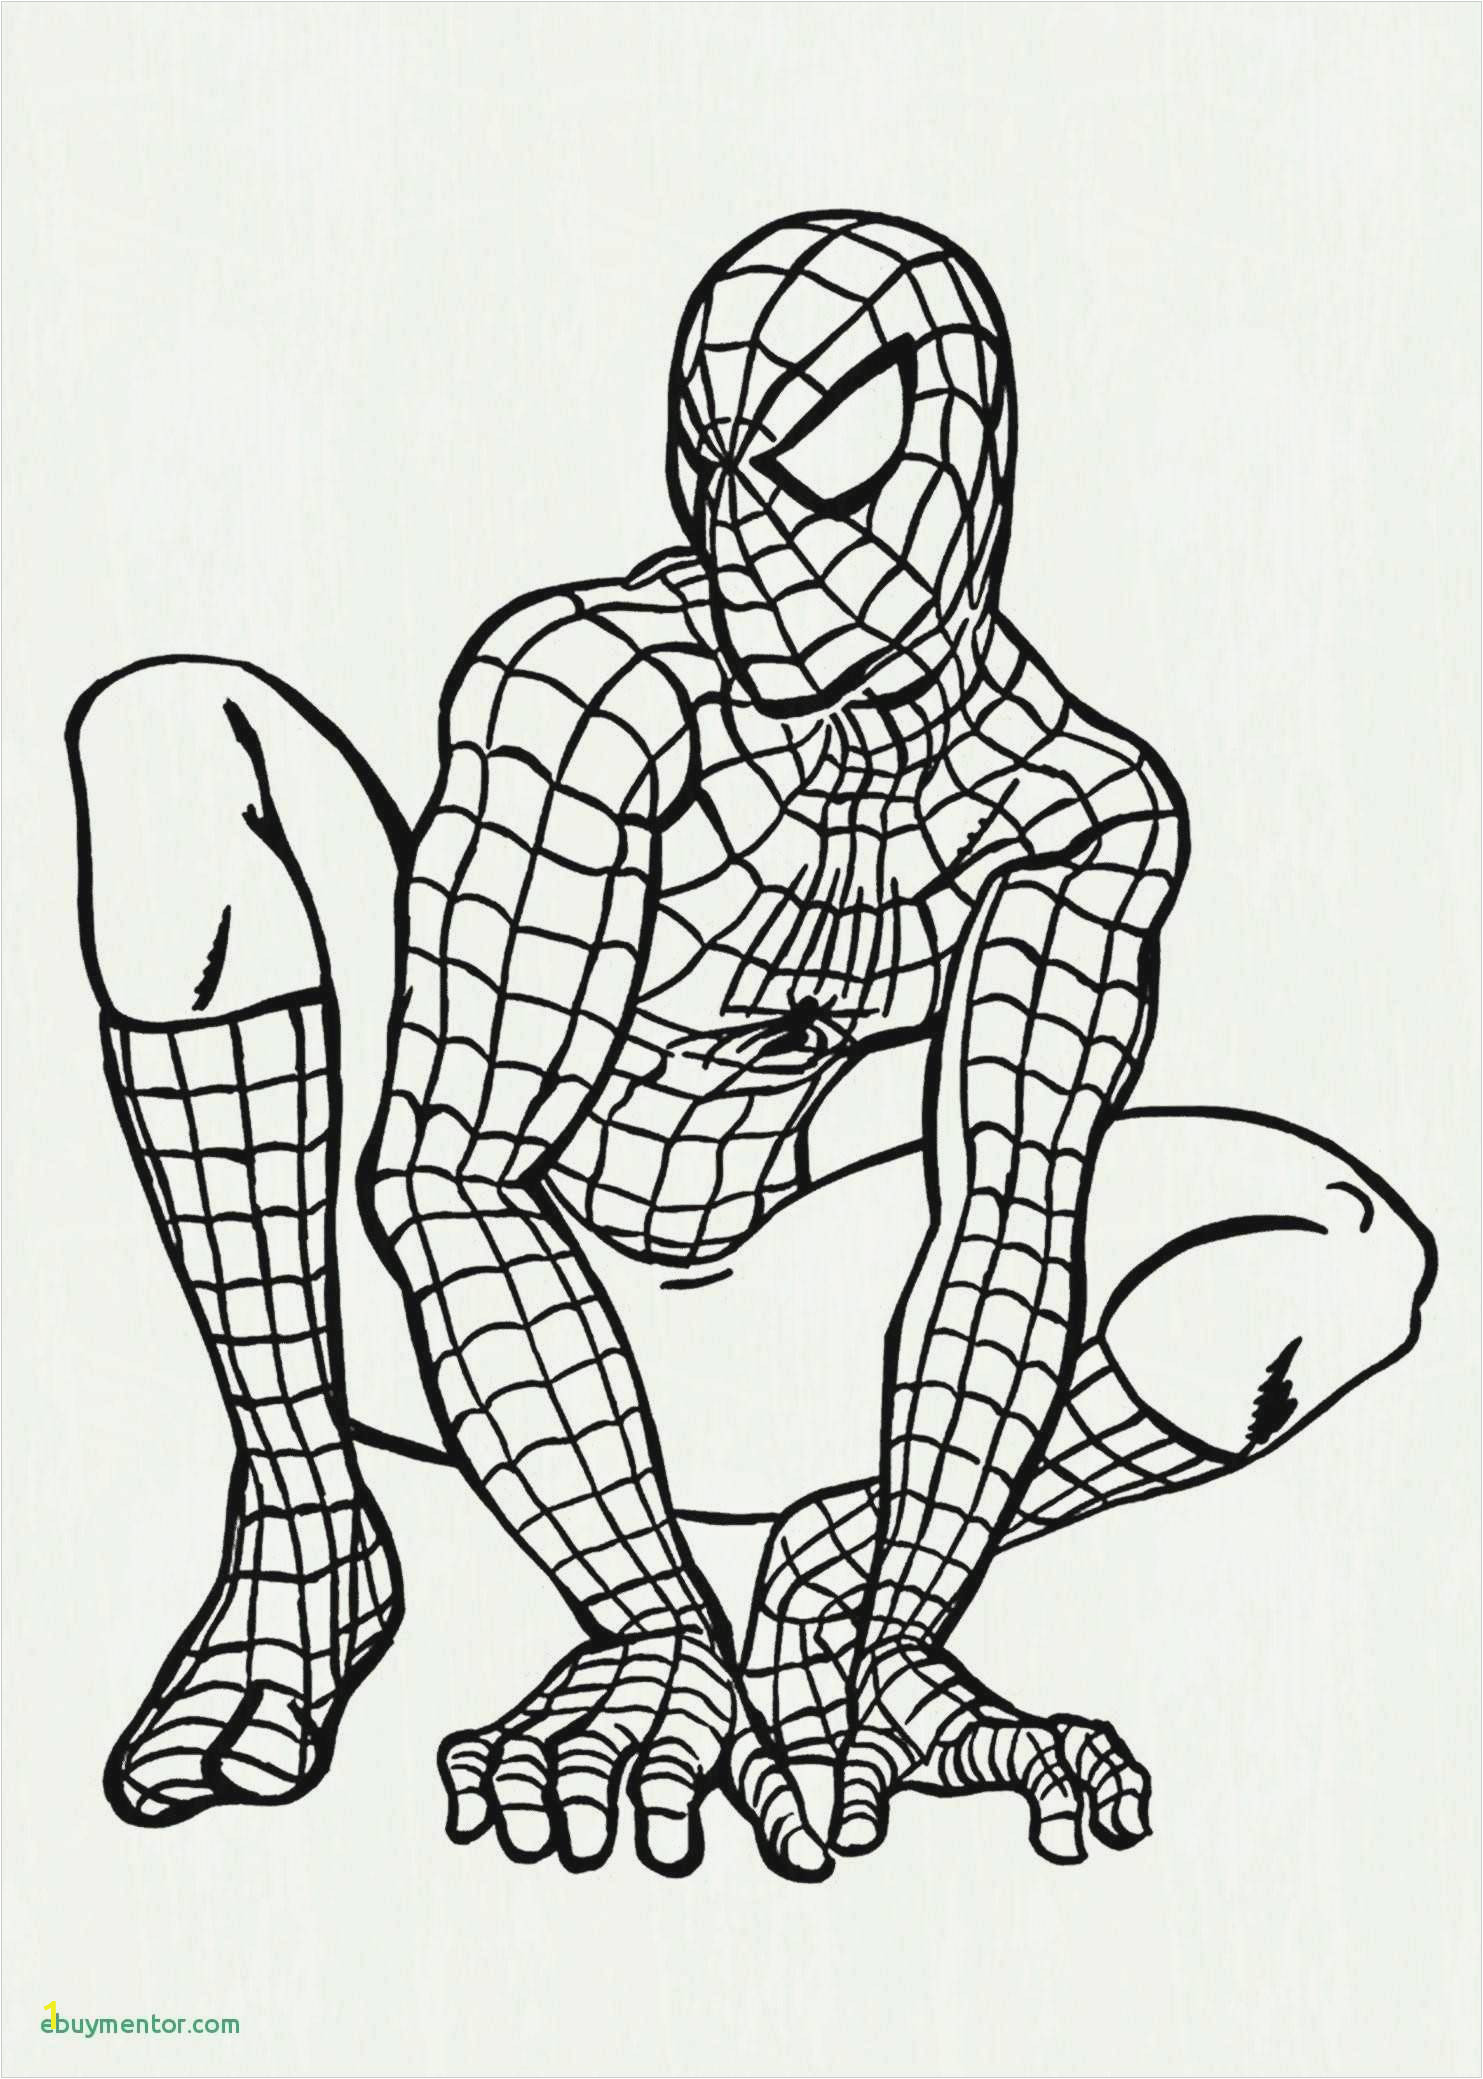 Print Coloring Pages Disney New Coloring Pages Superhero Printable Fresh 0 0d